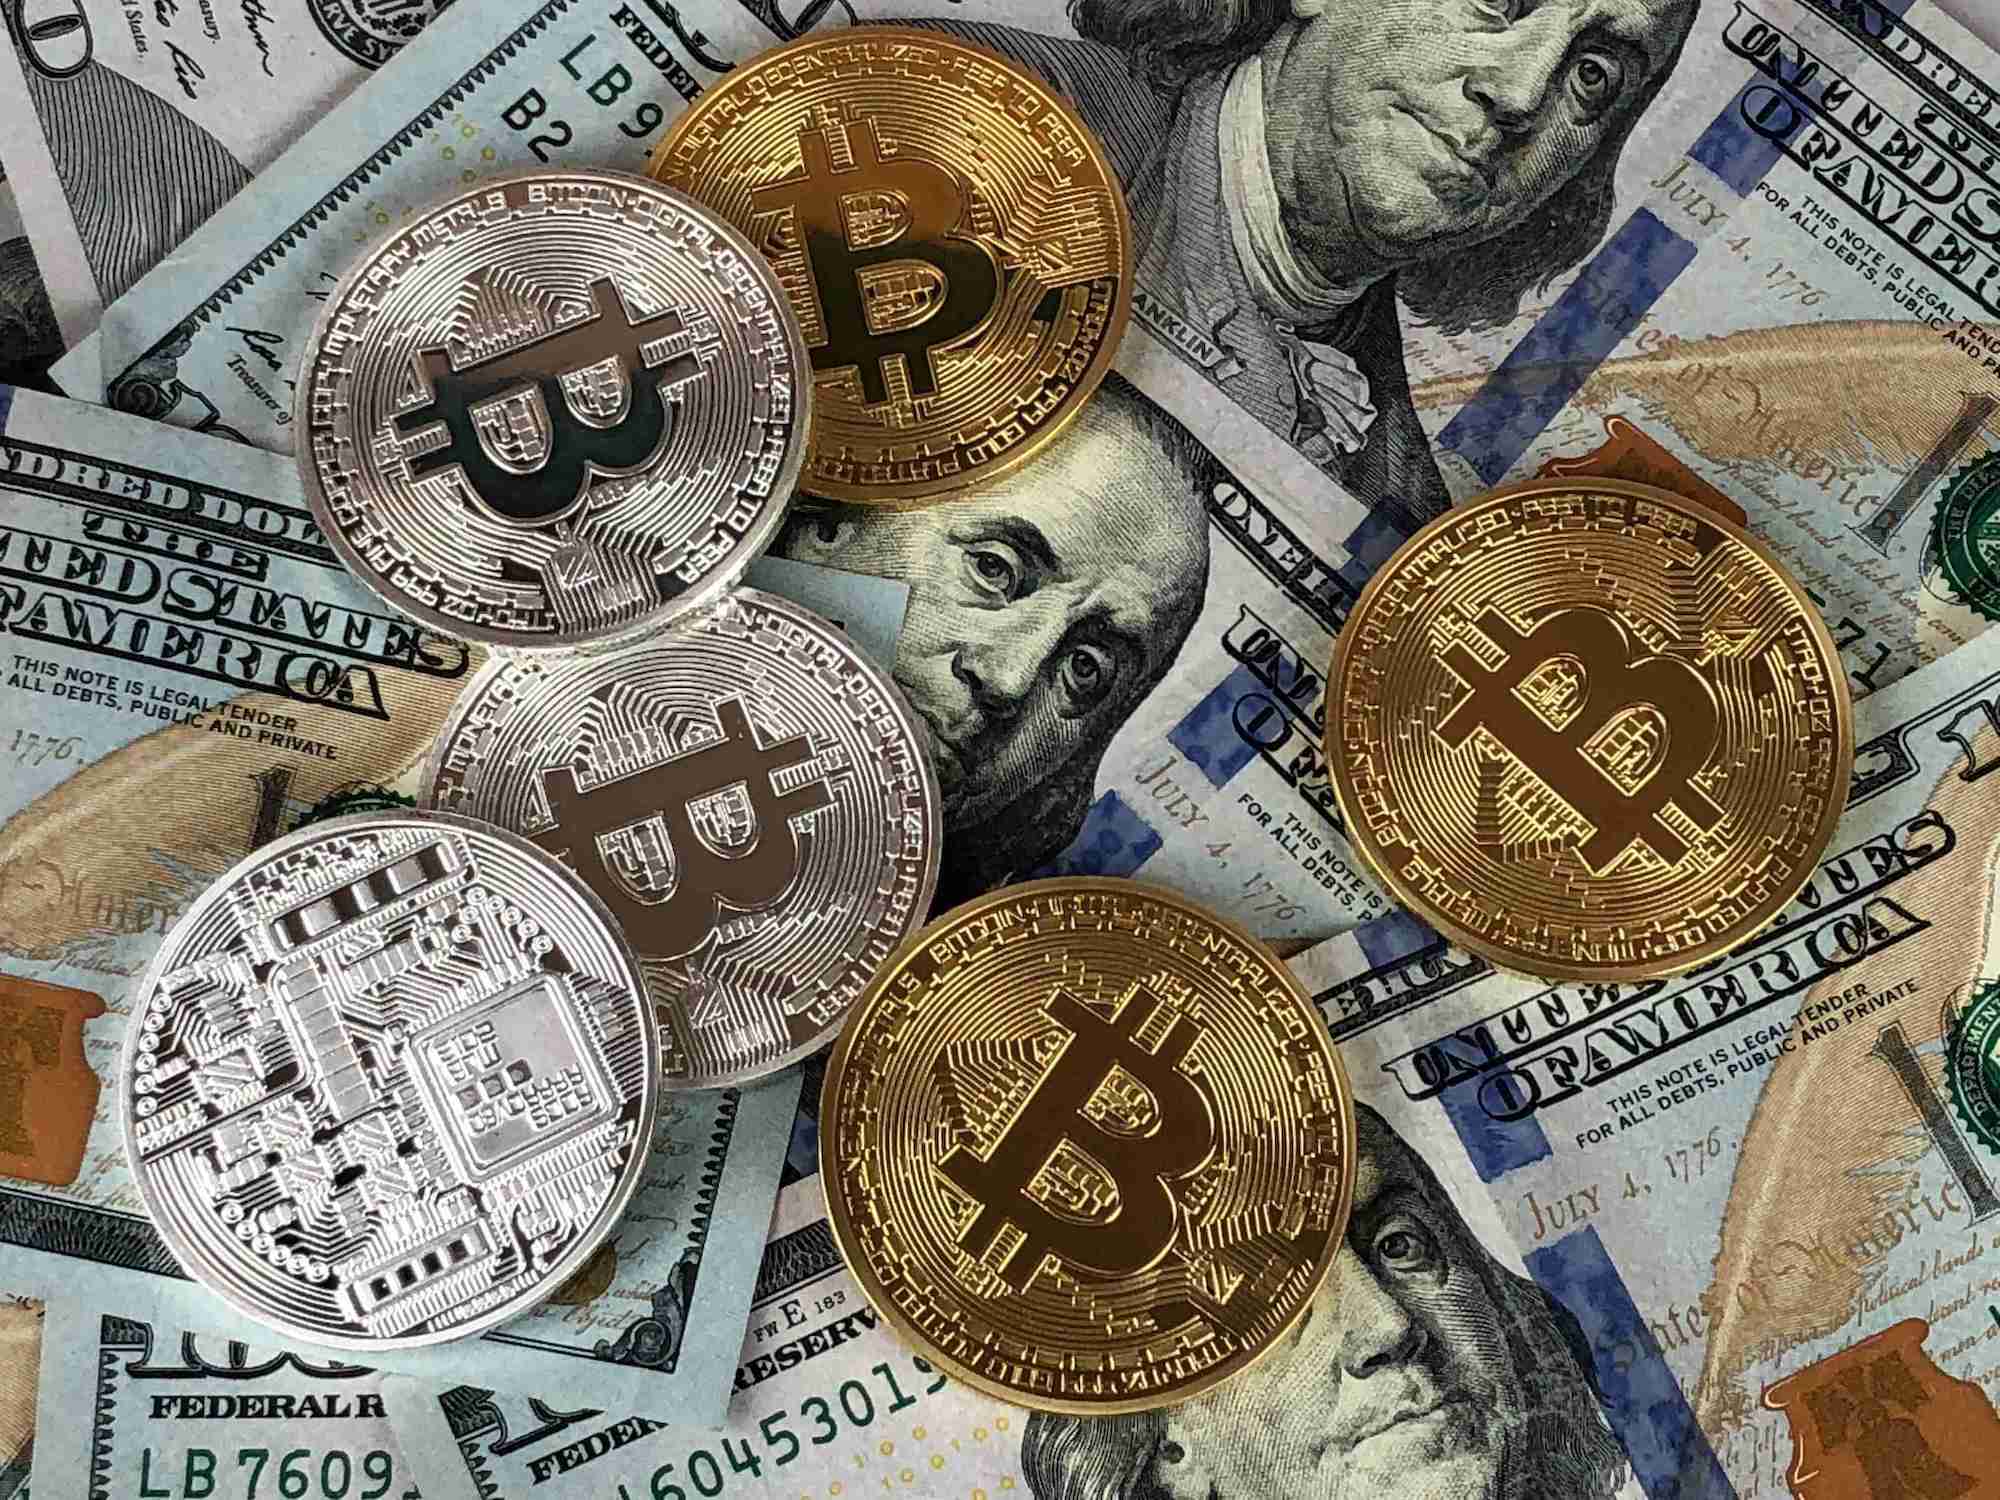 Six-gold-and-silver-coins-featuring-the-Bitcoin-symbol-lie-on-top-of-an-arrangement-of-100-dollar-bills.